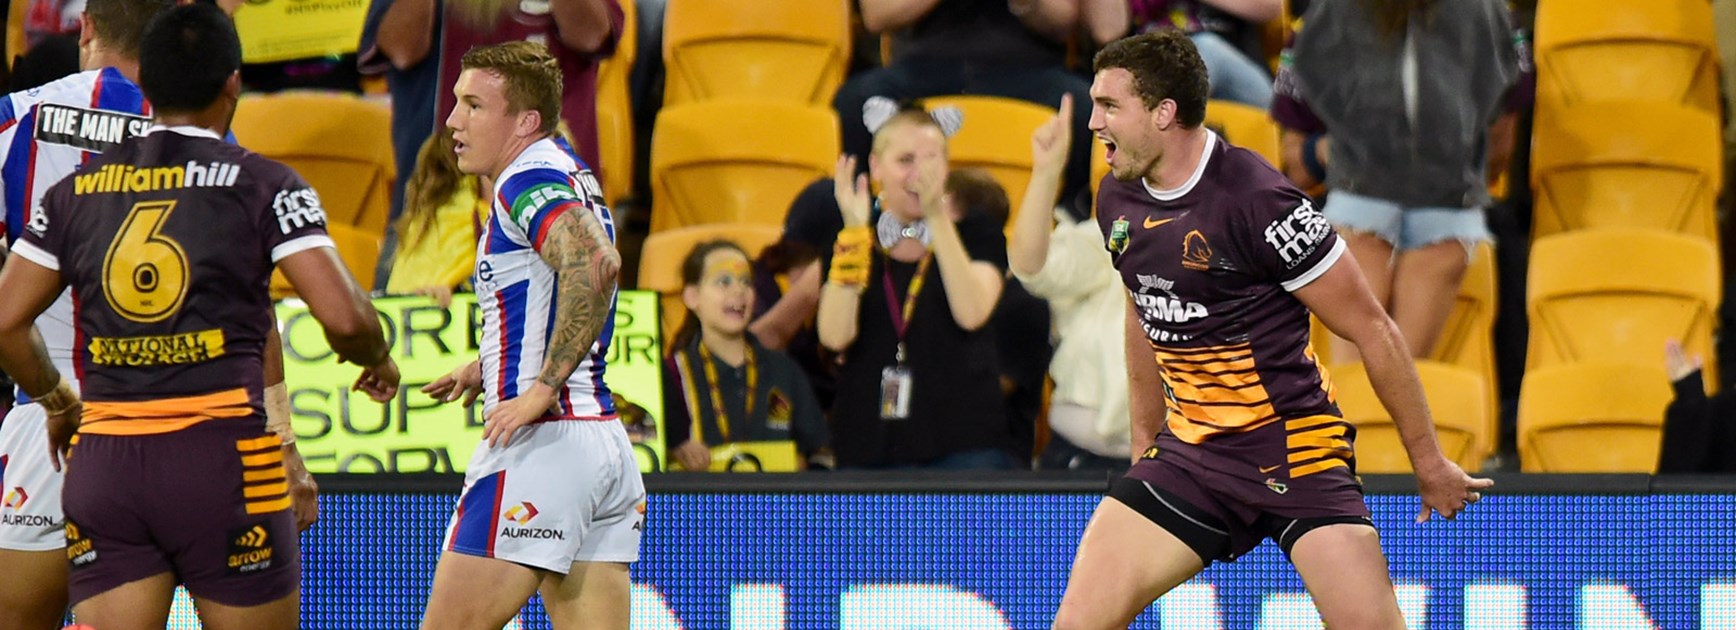 Broncos winger Corey Oates celebrates a try against the Knights.